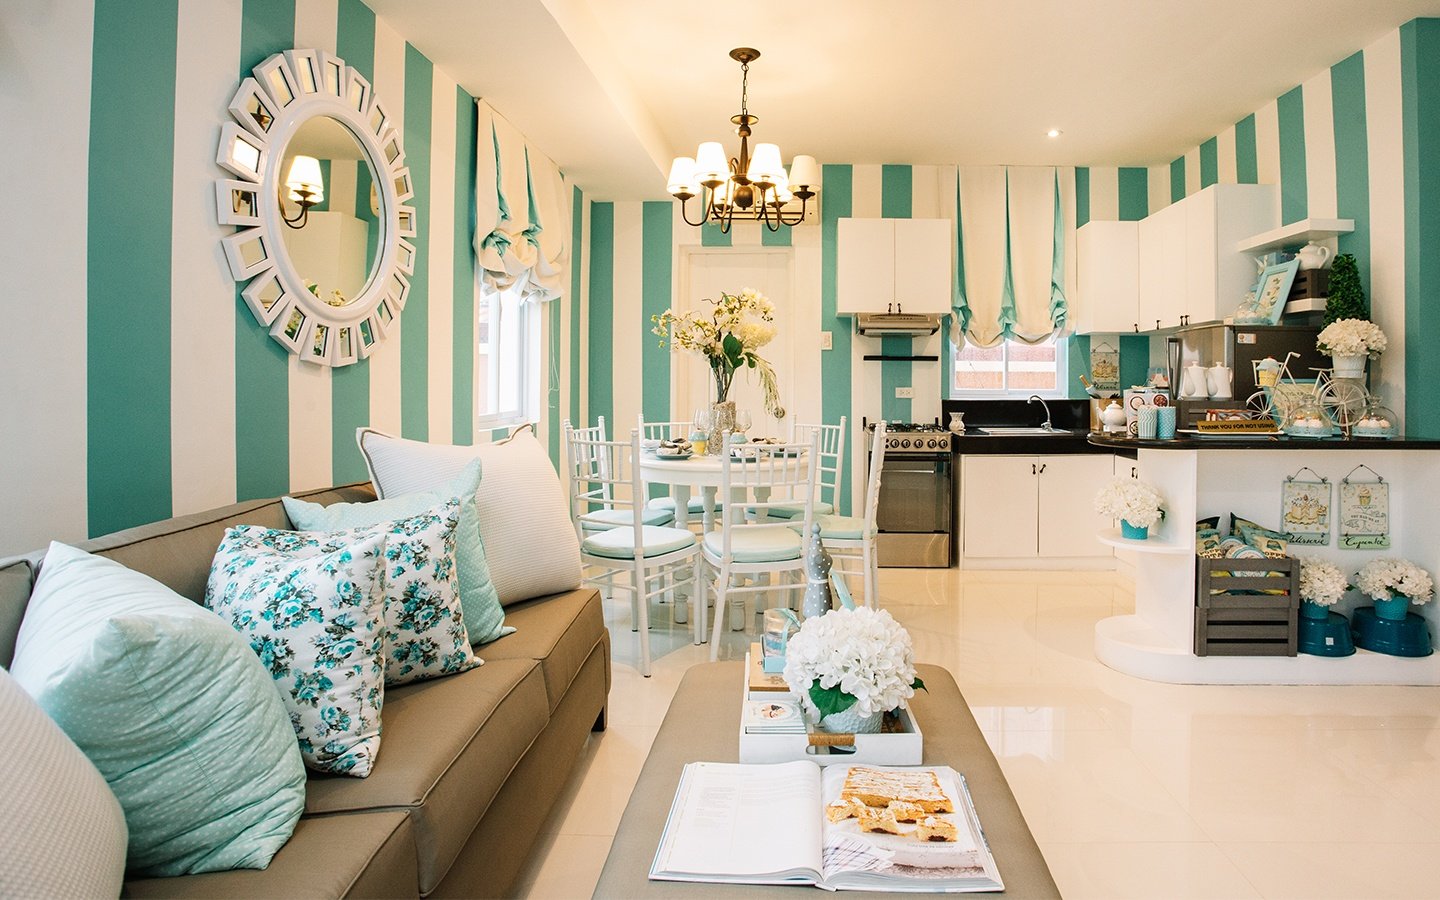 Cara home ground floor blue and teal interior design